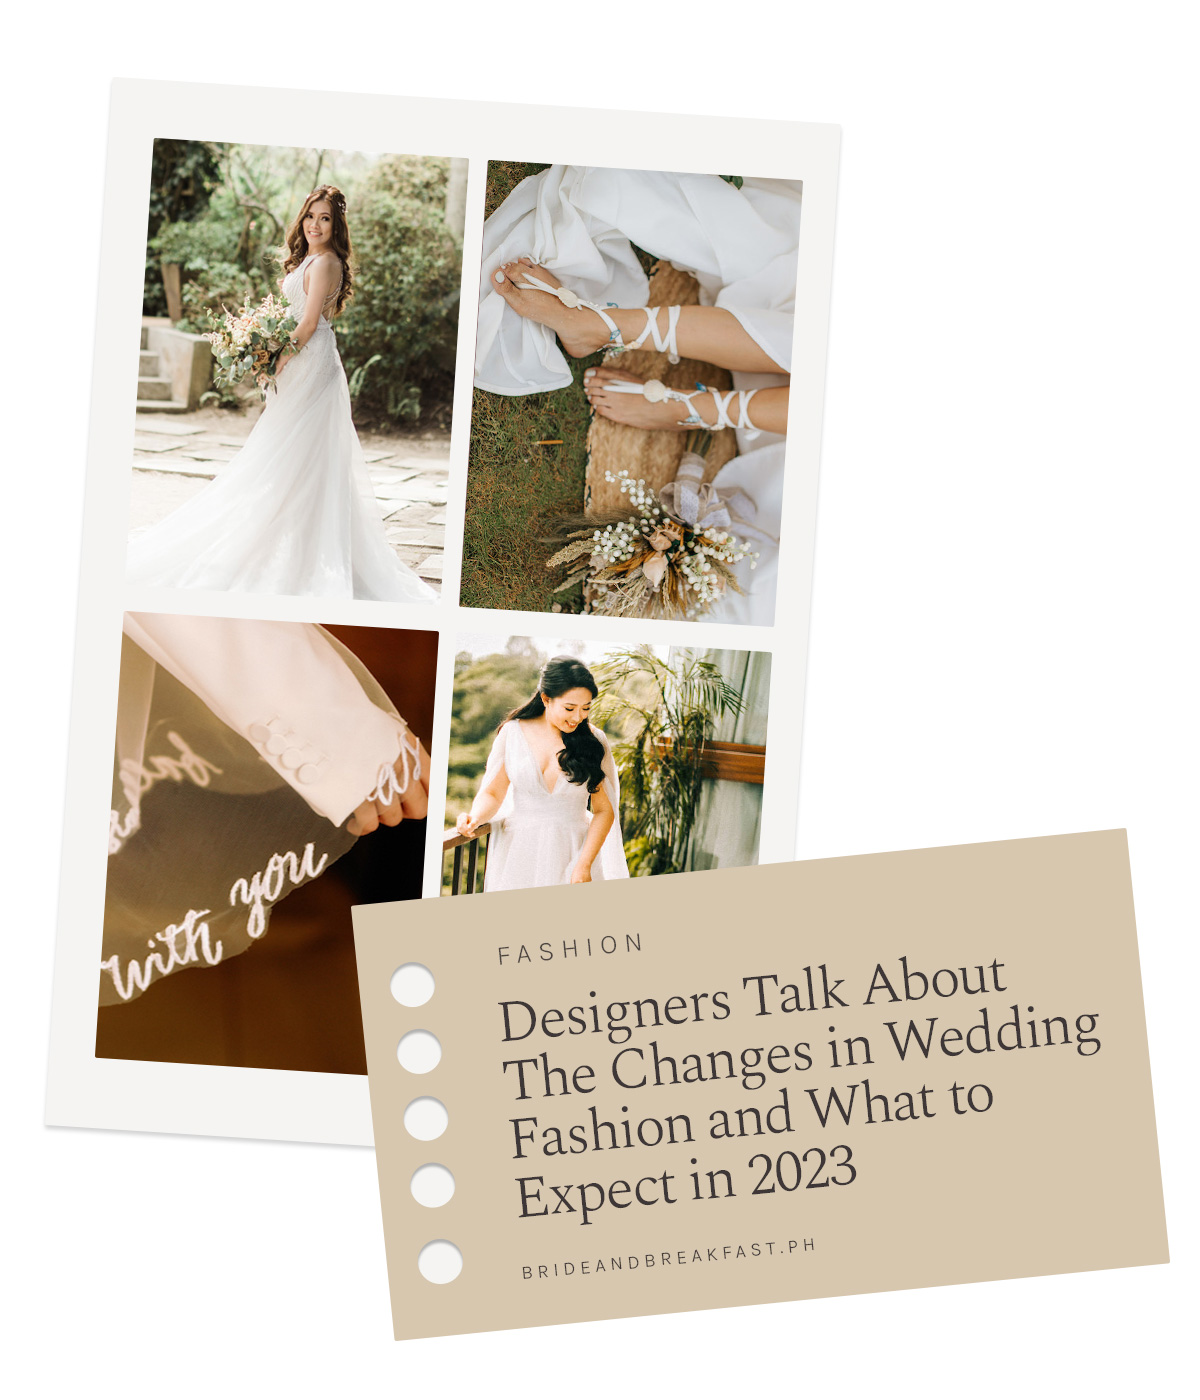 Designers Talk About the Changes in Wedding Fashion and What to Expect in 2023